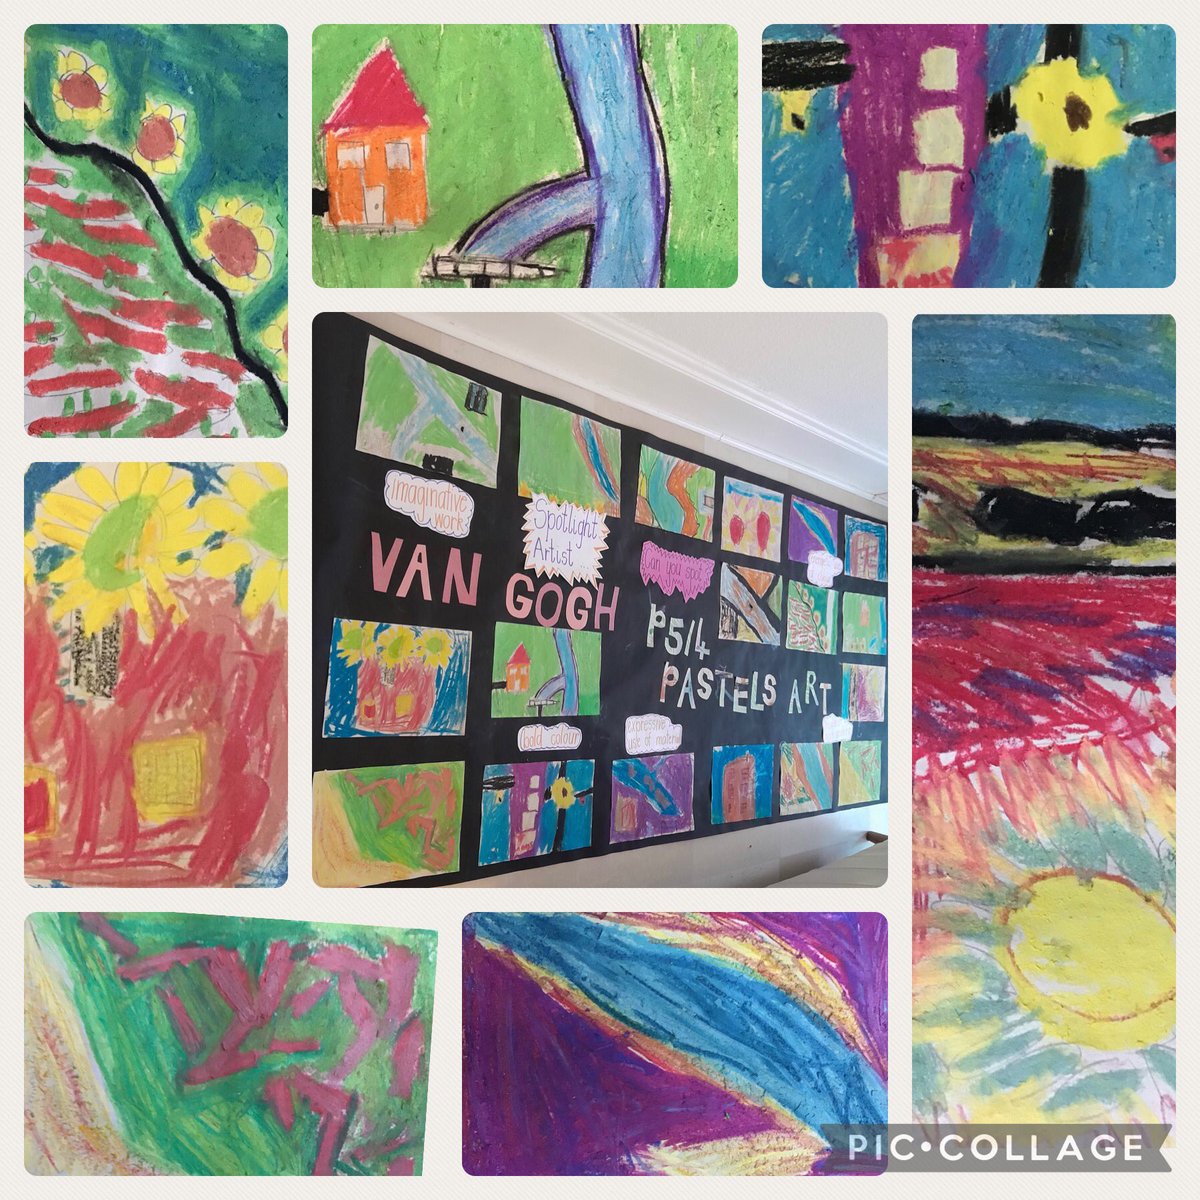 Hello Team Garnetbank!👋Have a look at the exhibition of expressive, bold and colourful work created by P5/4 artists .They very much enjoyed exploring the work of Van Gogh and using what they saw in their own work.@GarnetbankPS @rukhsana1akhtar @tate_kids #creativity